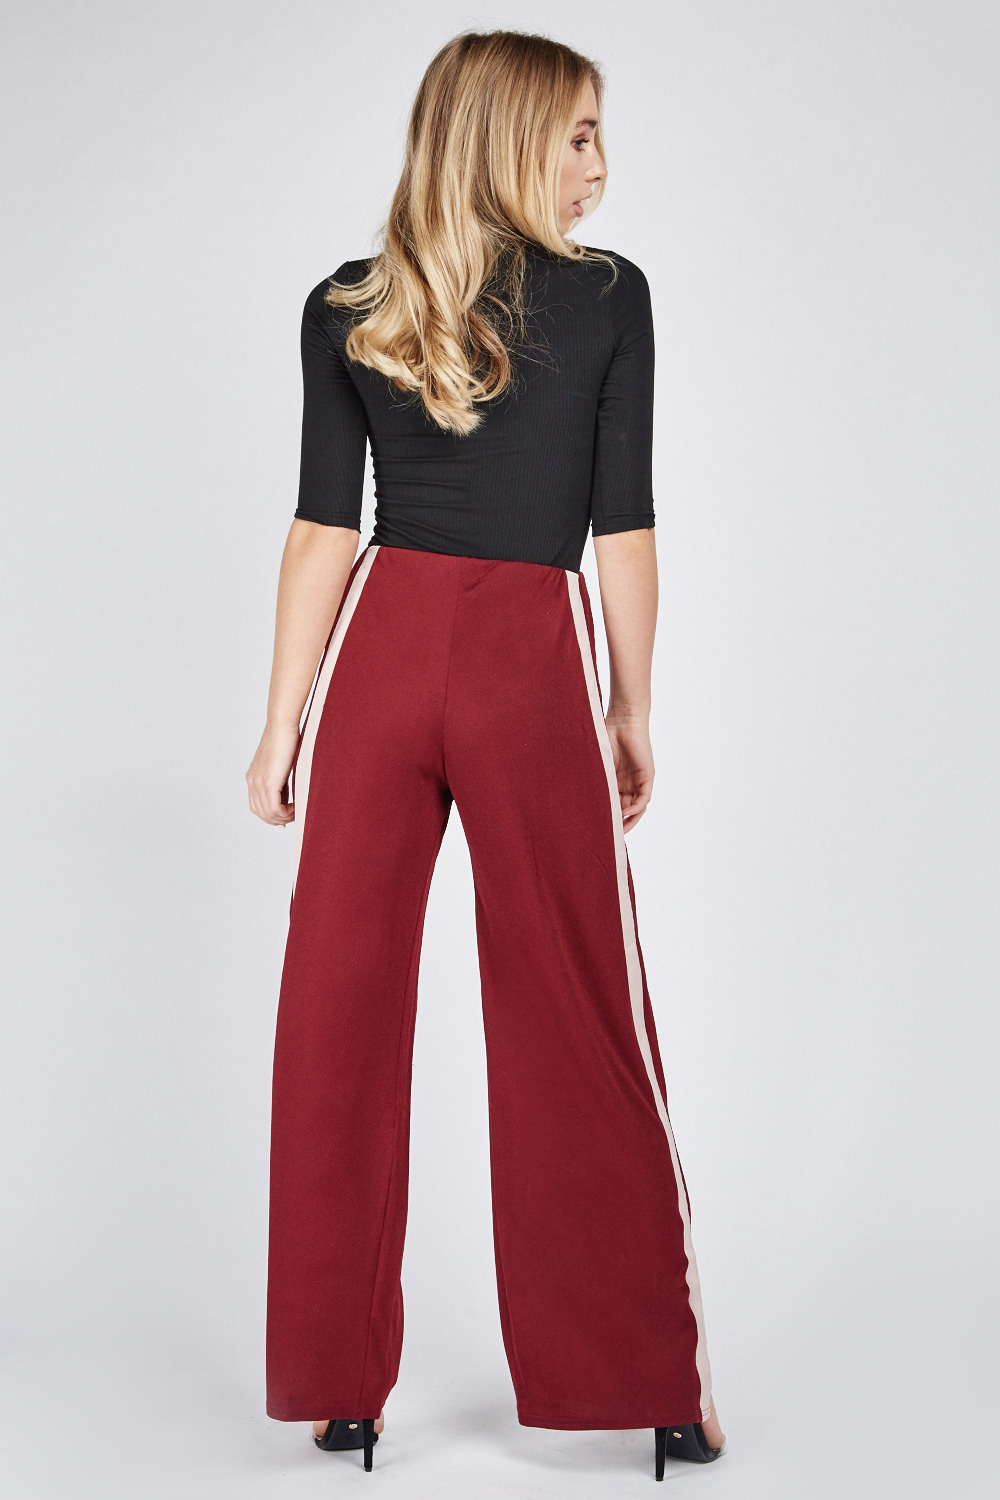 Burgundy Contrast Wide Leg Jogger Style Pants - Just $3